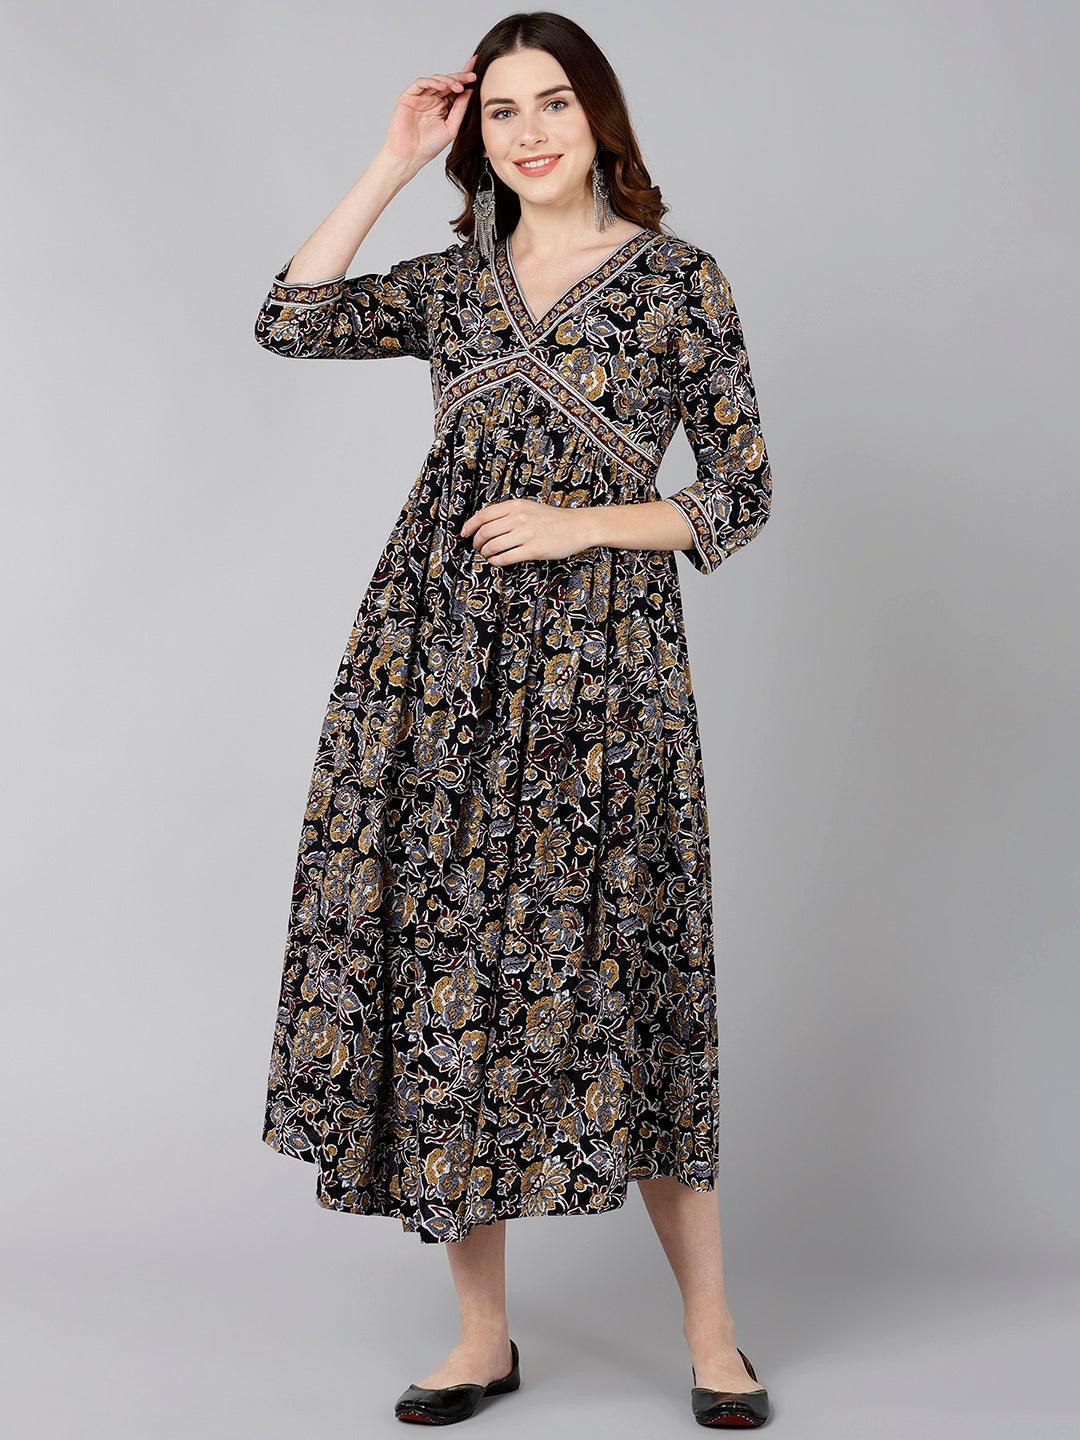 Brown Floral Printed Flared Dress - Znxclothing